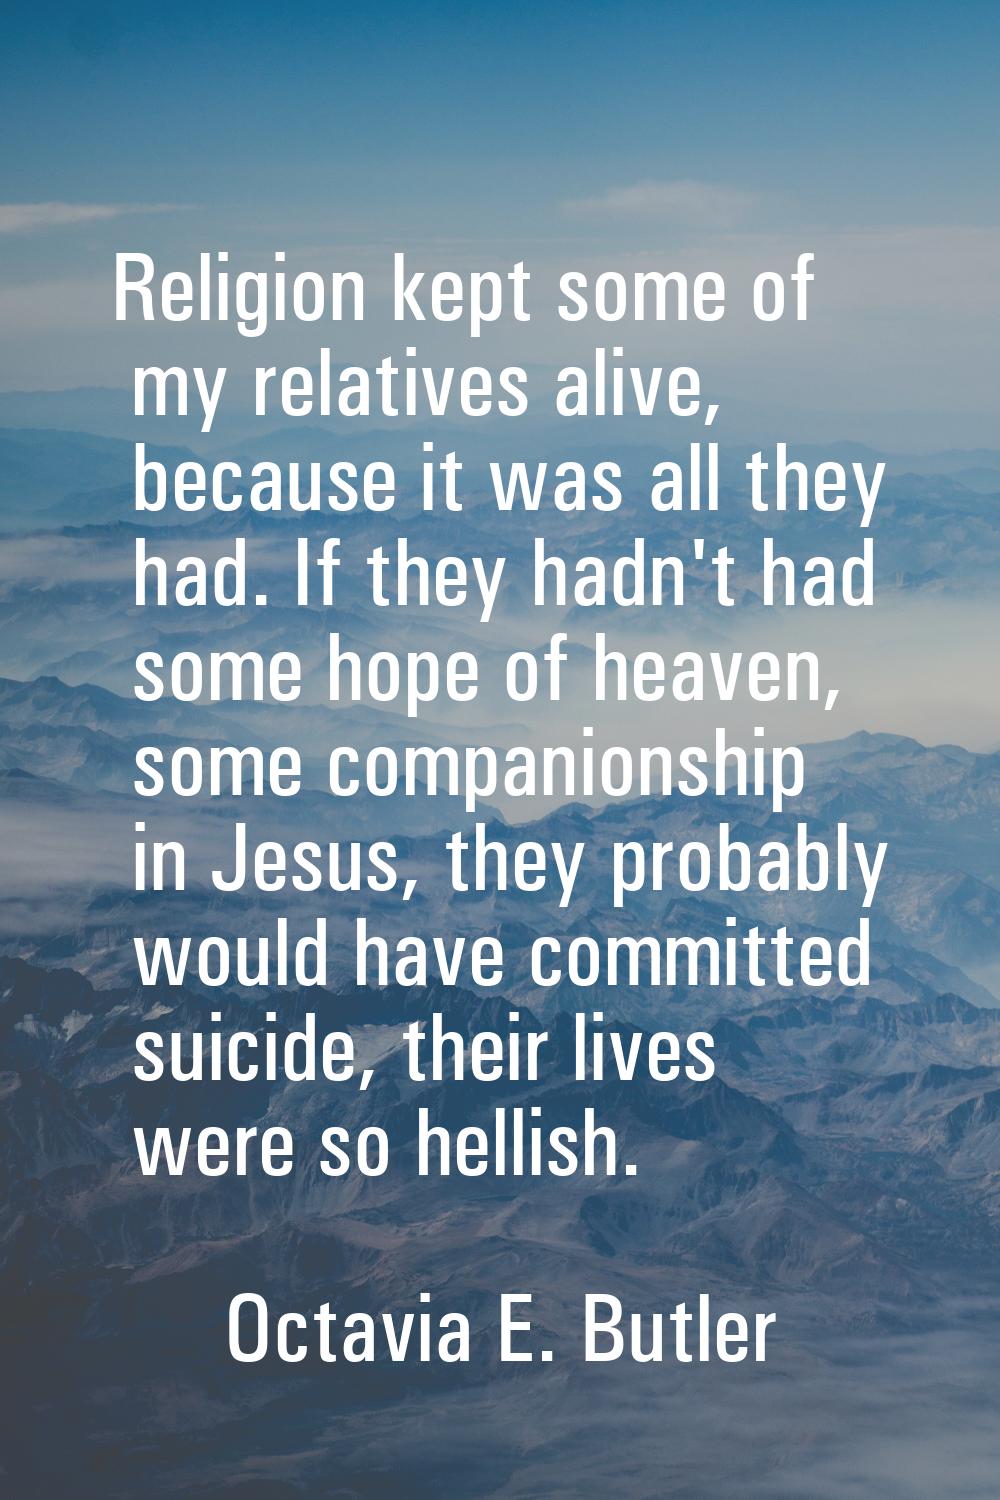 Religion kept some of my relatives alive, because it was all they had. If they hadn't had some hope